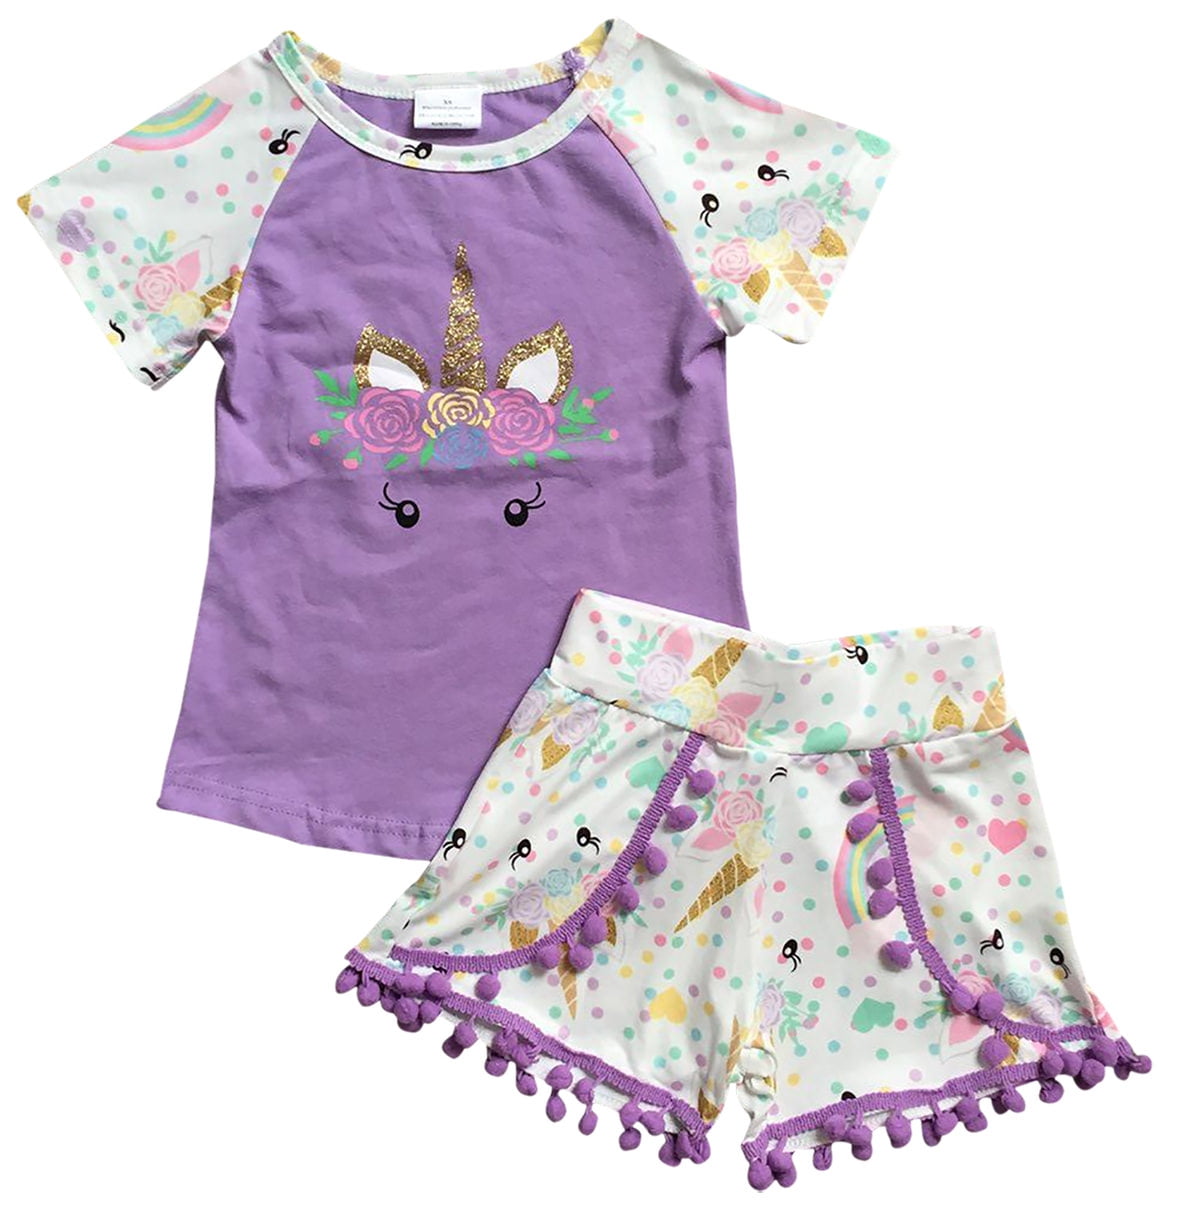 Nwt Details about   Gap Girls 18-24 Months Butterfly Shirt & Pink Silver Heart Shorts Outfit 